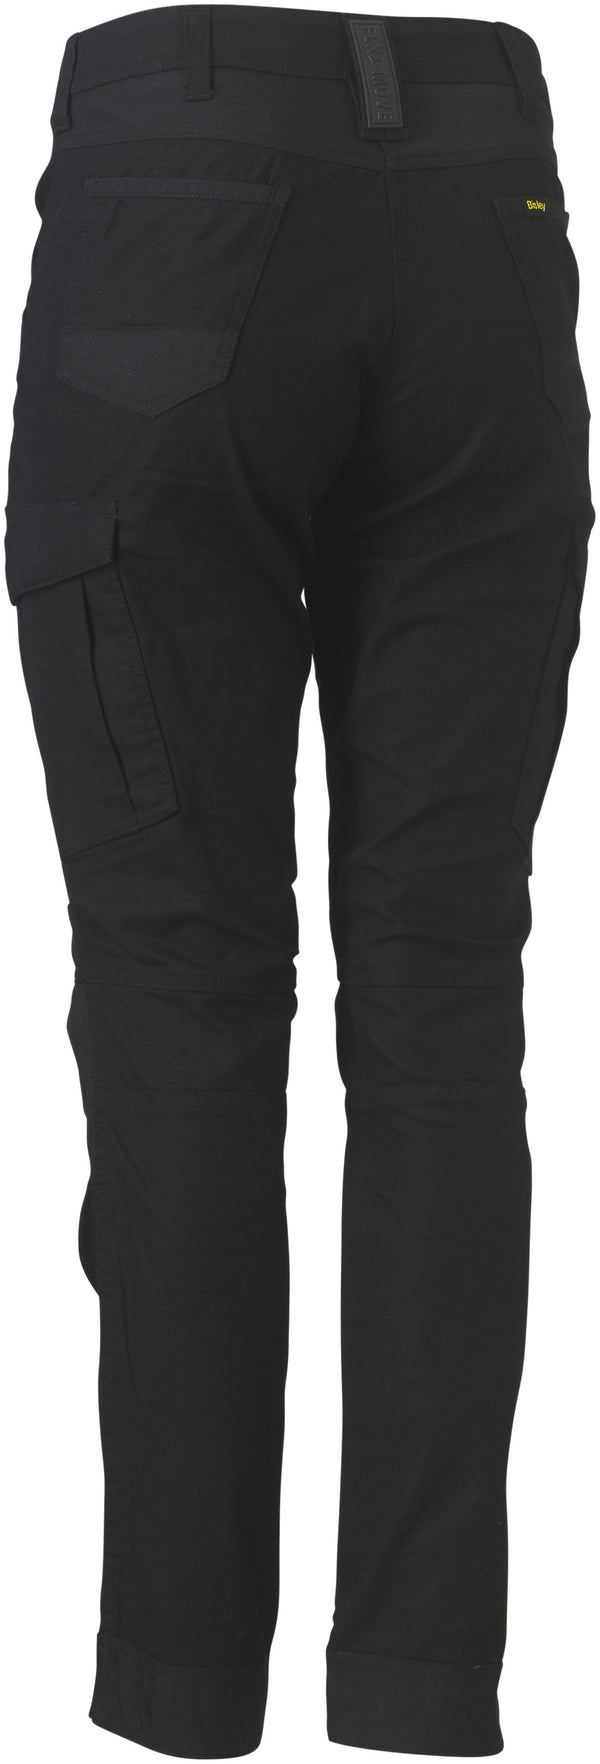 FLX & MOVE Womens Cargo Pants